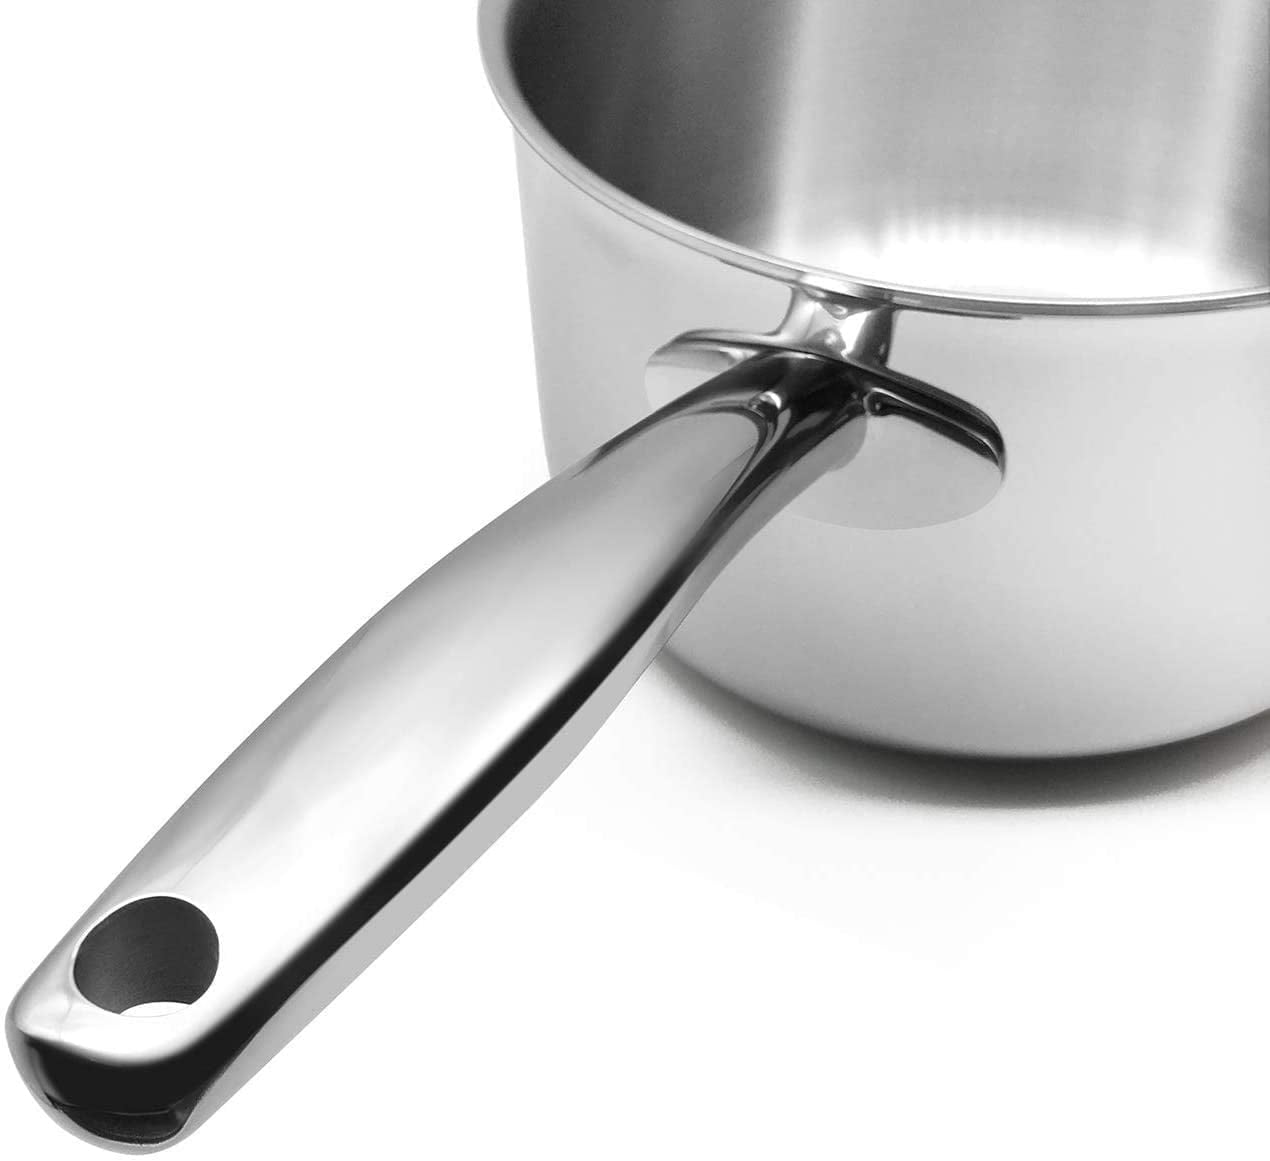 Fortune Candy 1.6-Quart Saucepan with Lid, Tri-Ply, 18/10 Stainless Steel,  Comfortable Grip & Advanced Welding Technology, Dishwasher Safe, Induction  Ready, Mirror Finish, Silver